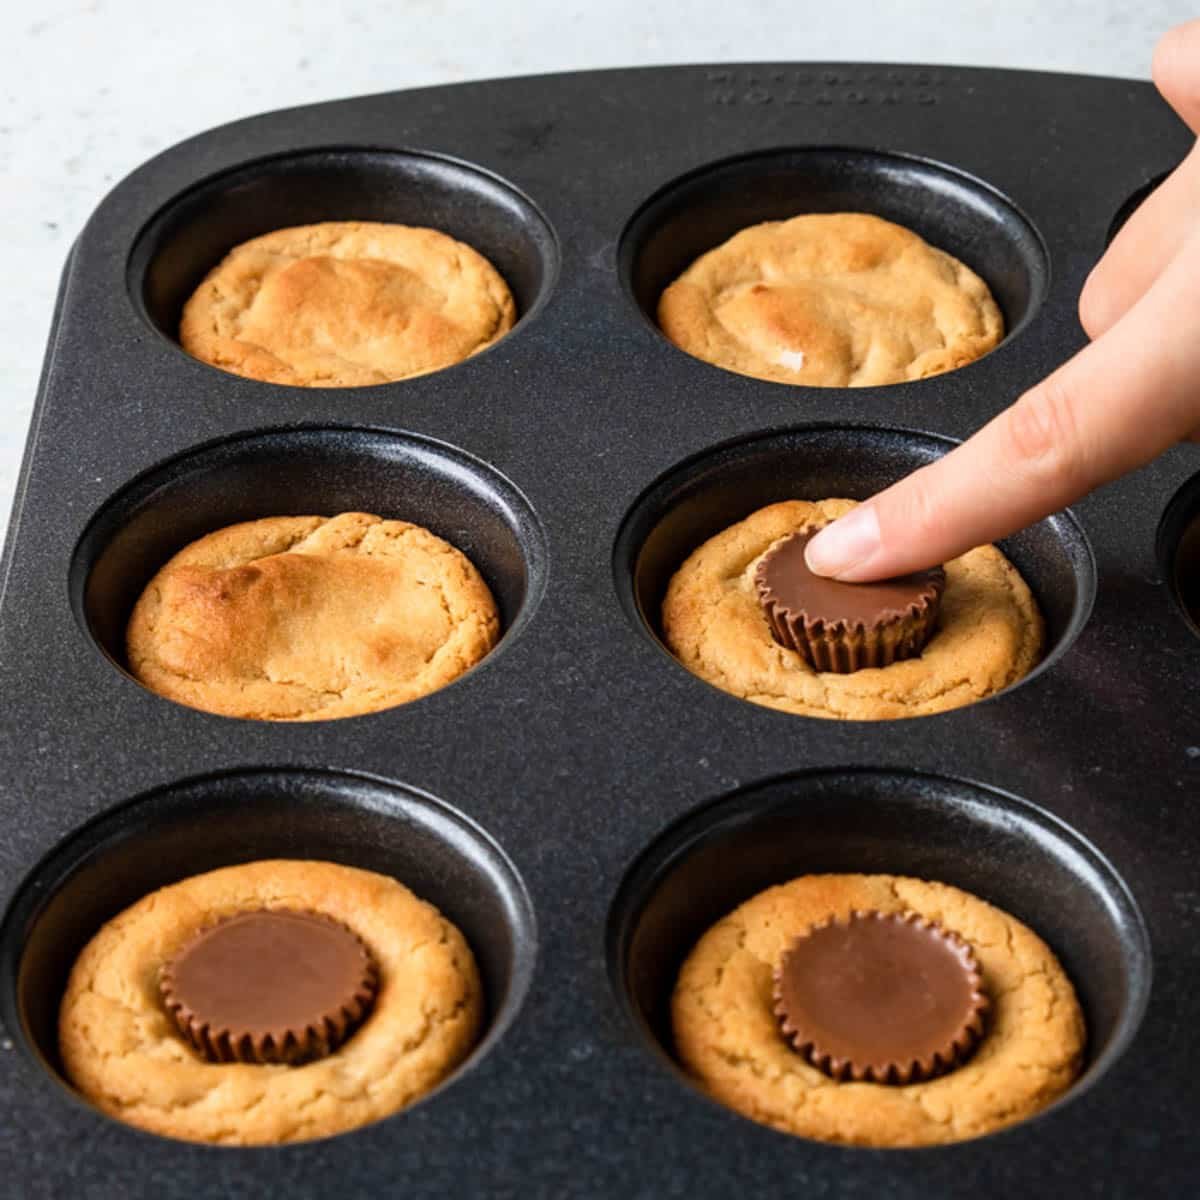 pressing a mini Reece's Peanut Butter Cup into the middle of the cooked peanut butter cookie cup